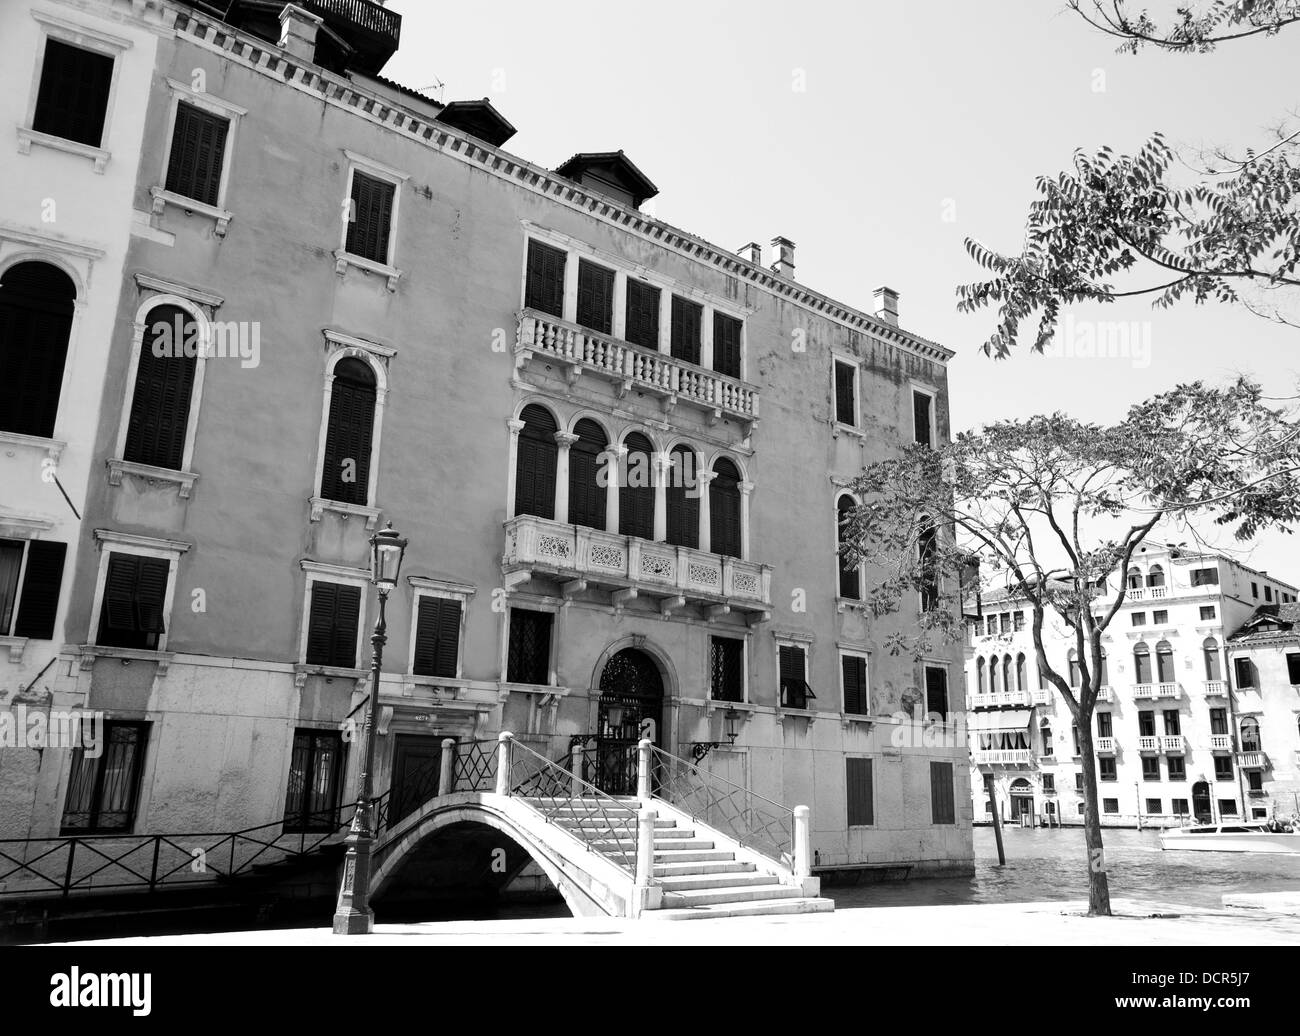 A black and white photograph of a Venietian building and small bridge, next to the Canal Grande, Venice, Italy Stock Photo